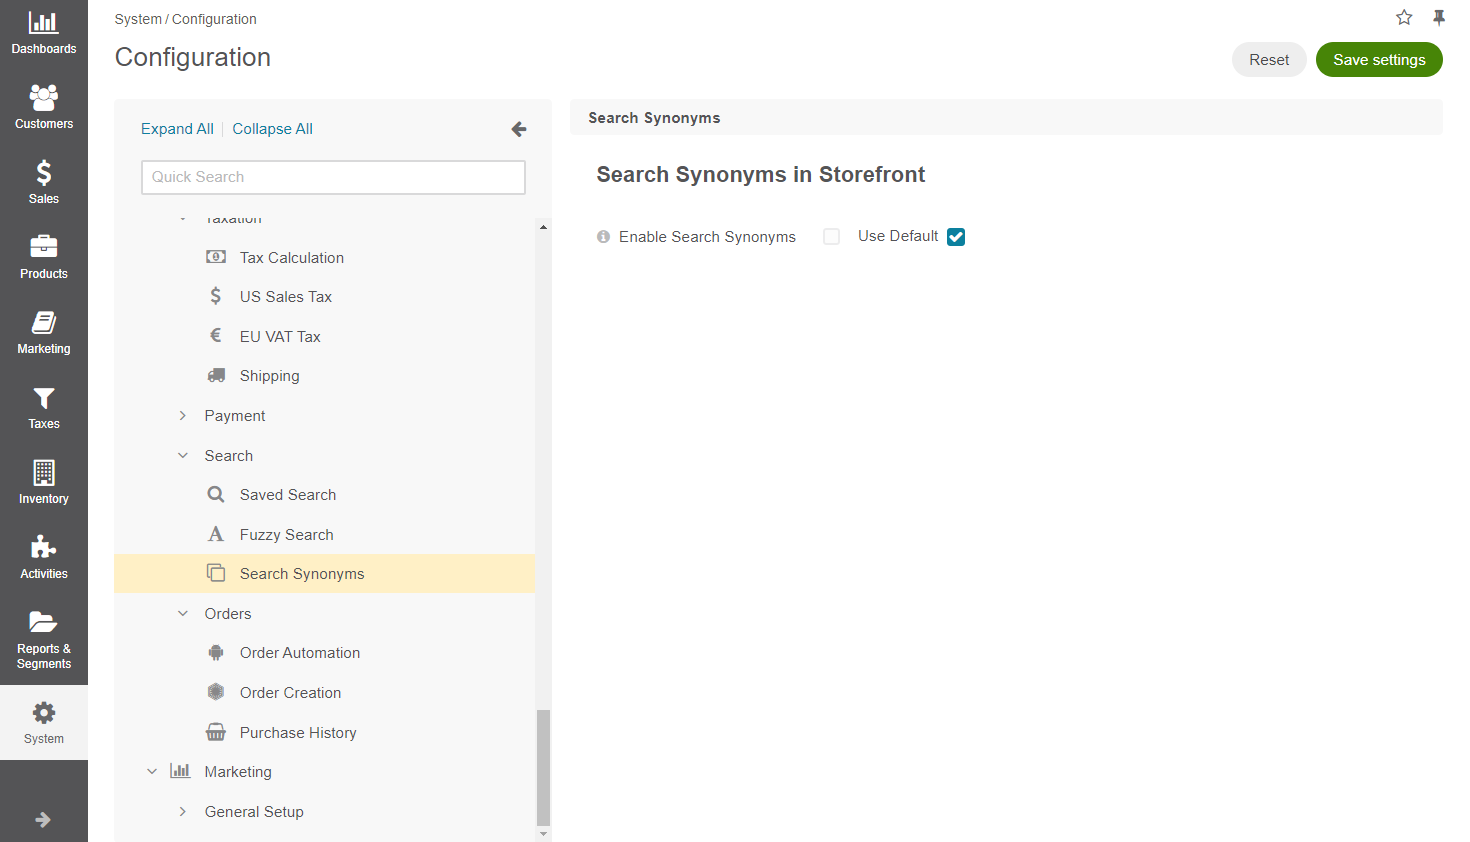 Search synonyms global configuration option